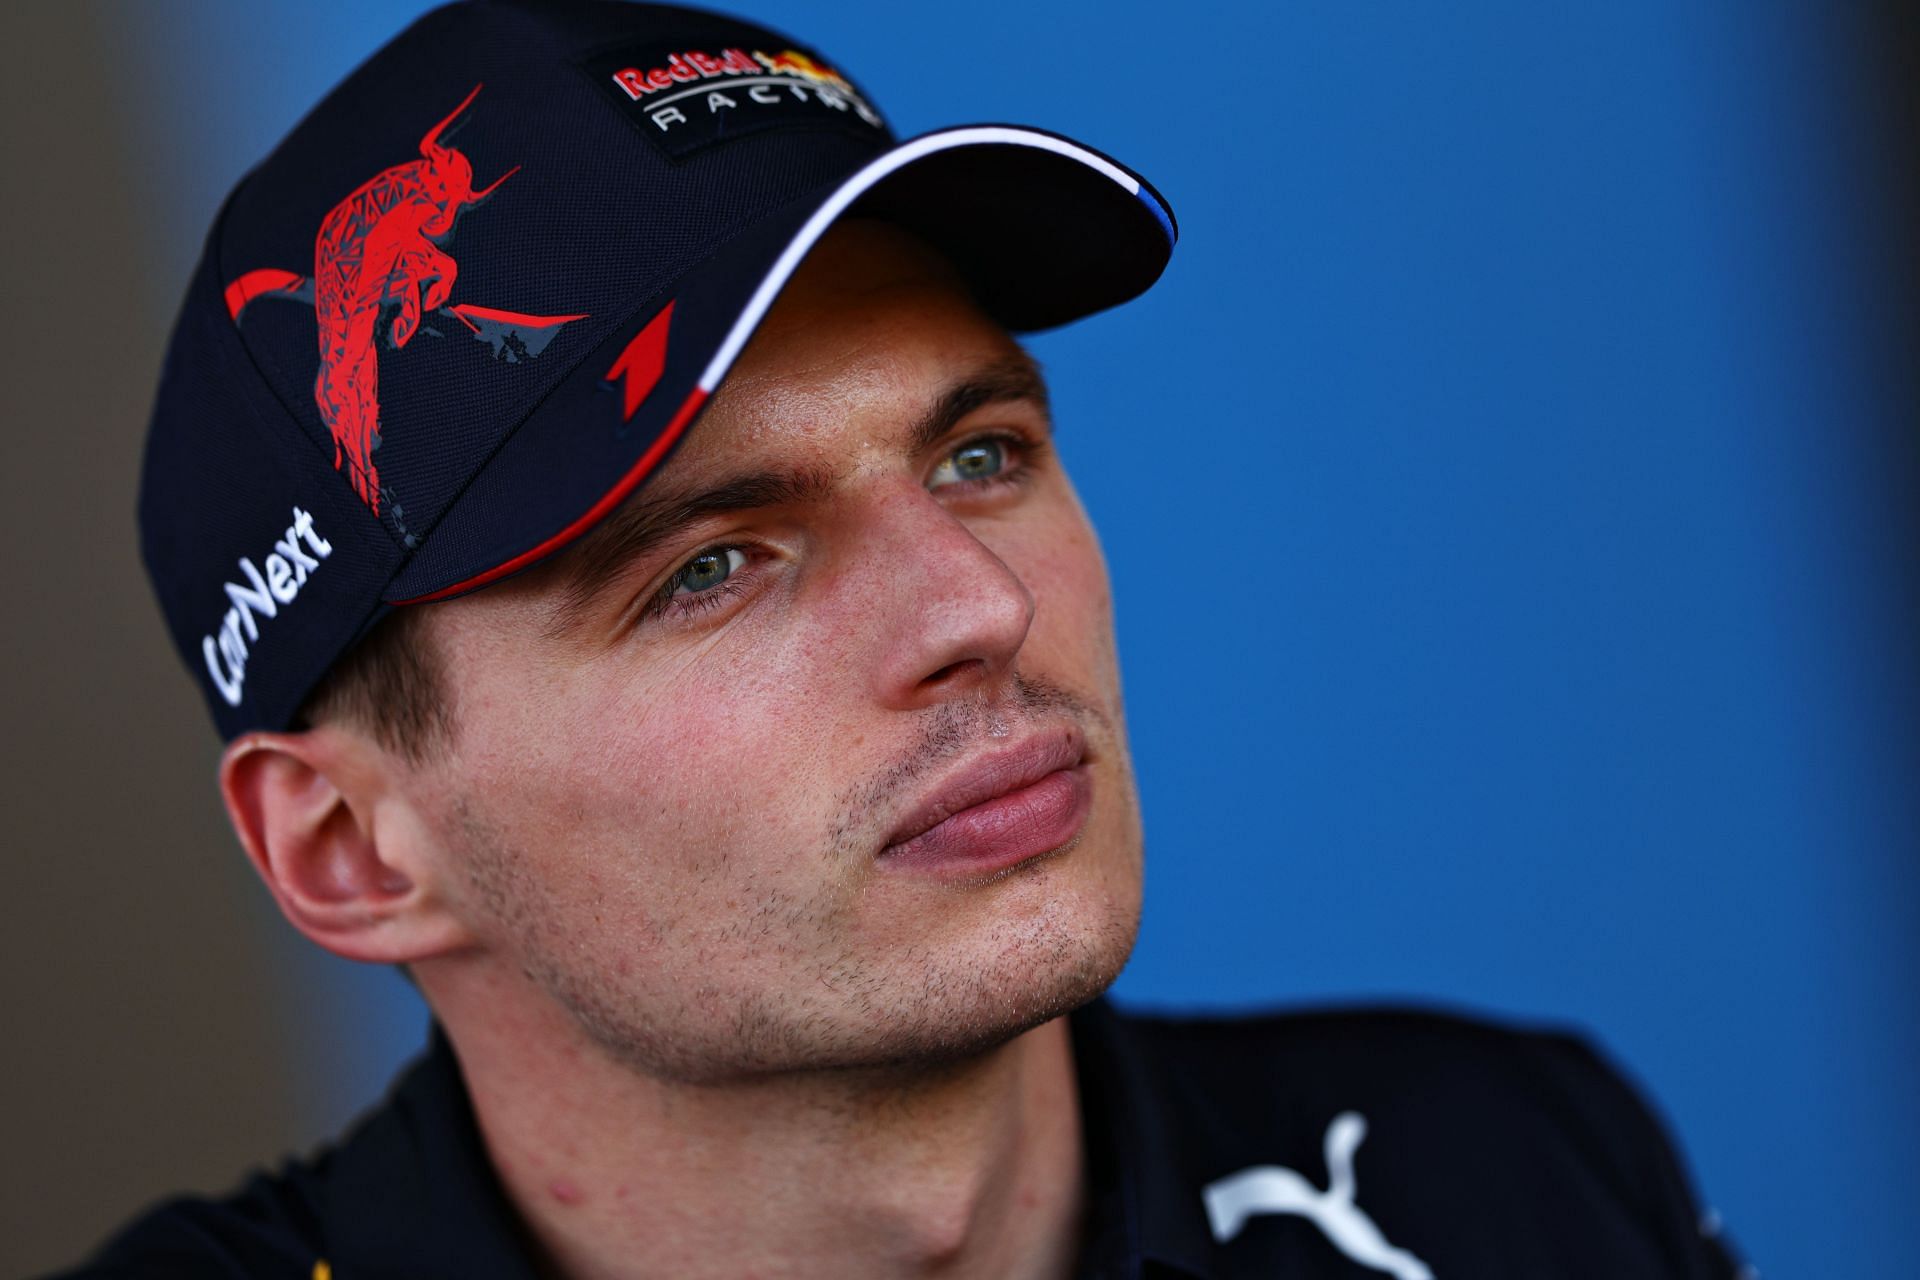 Max Verstappen talks to the media in the Paddock during previews ahead of the F1 Grand Prix of France at Circuit Paul Ricard on July 21, 2022 in Le Castellet, France. (Photo by Clive Rose/Getty Images)